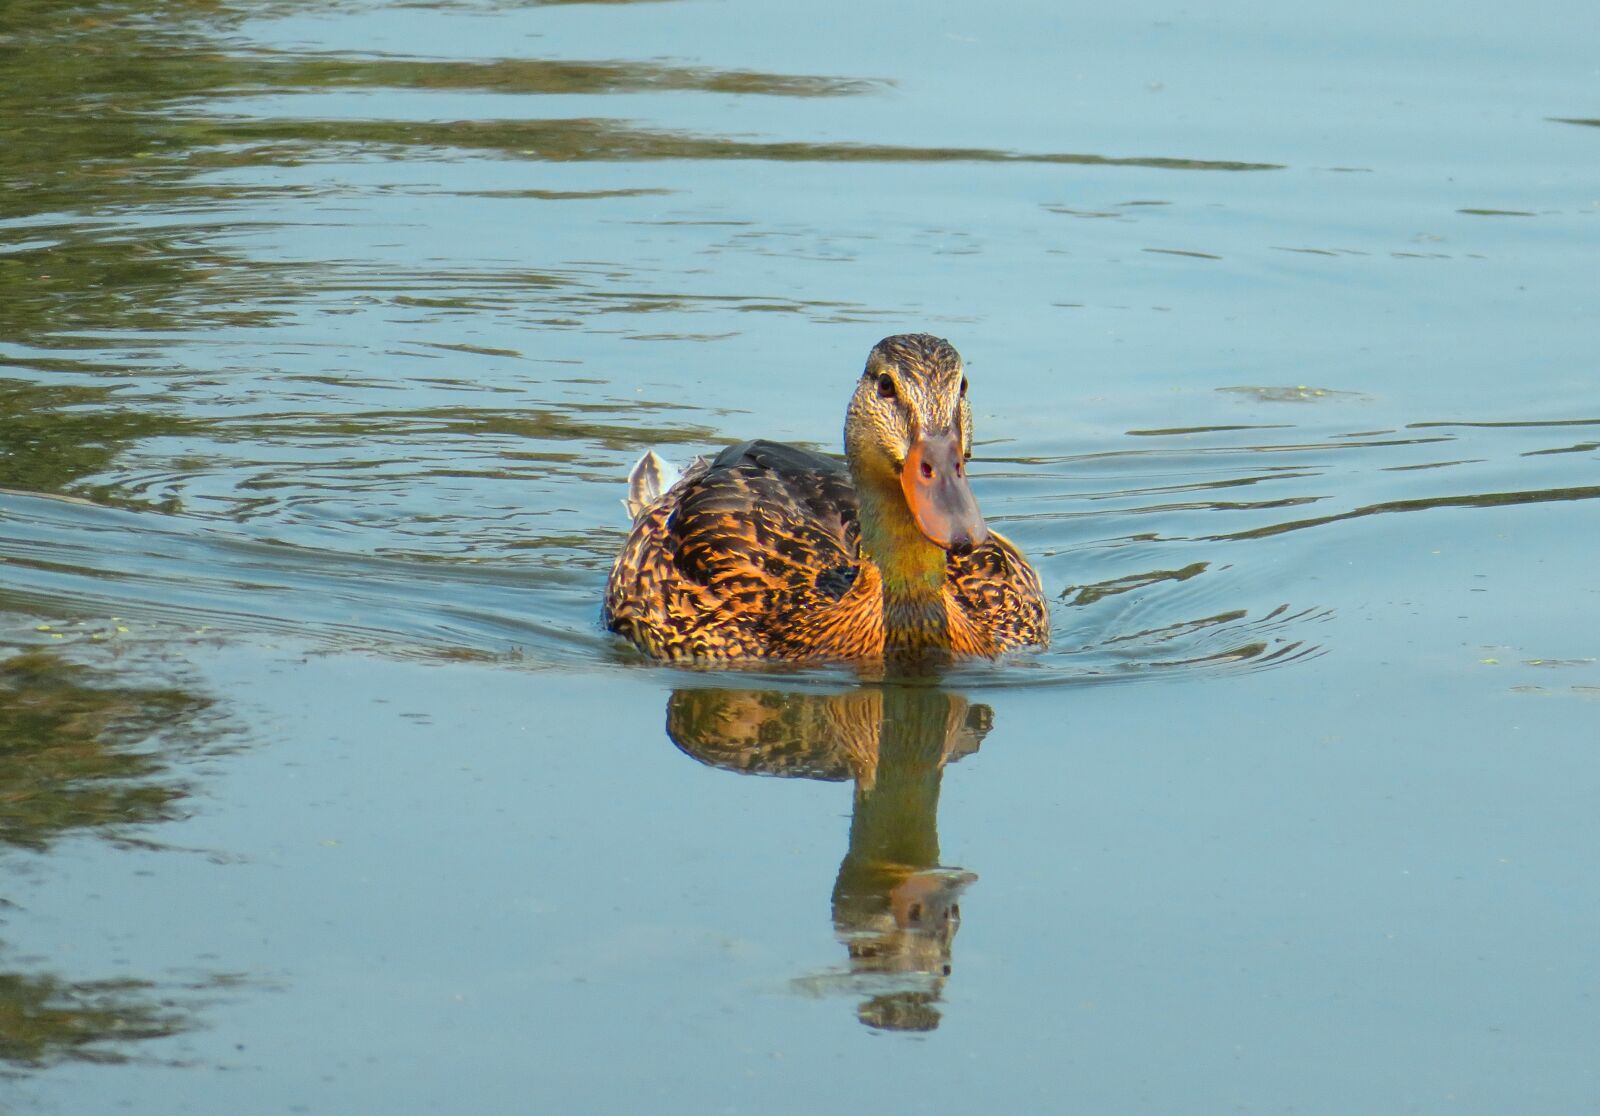 4.3 - 172.0 mm sample photo. Duck, waterfowl, pond photography